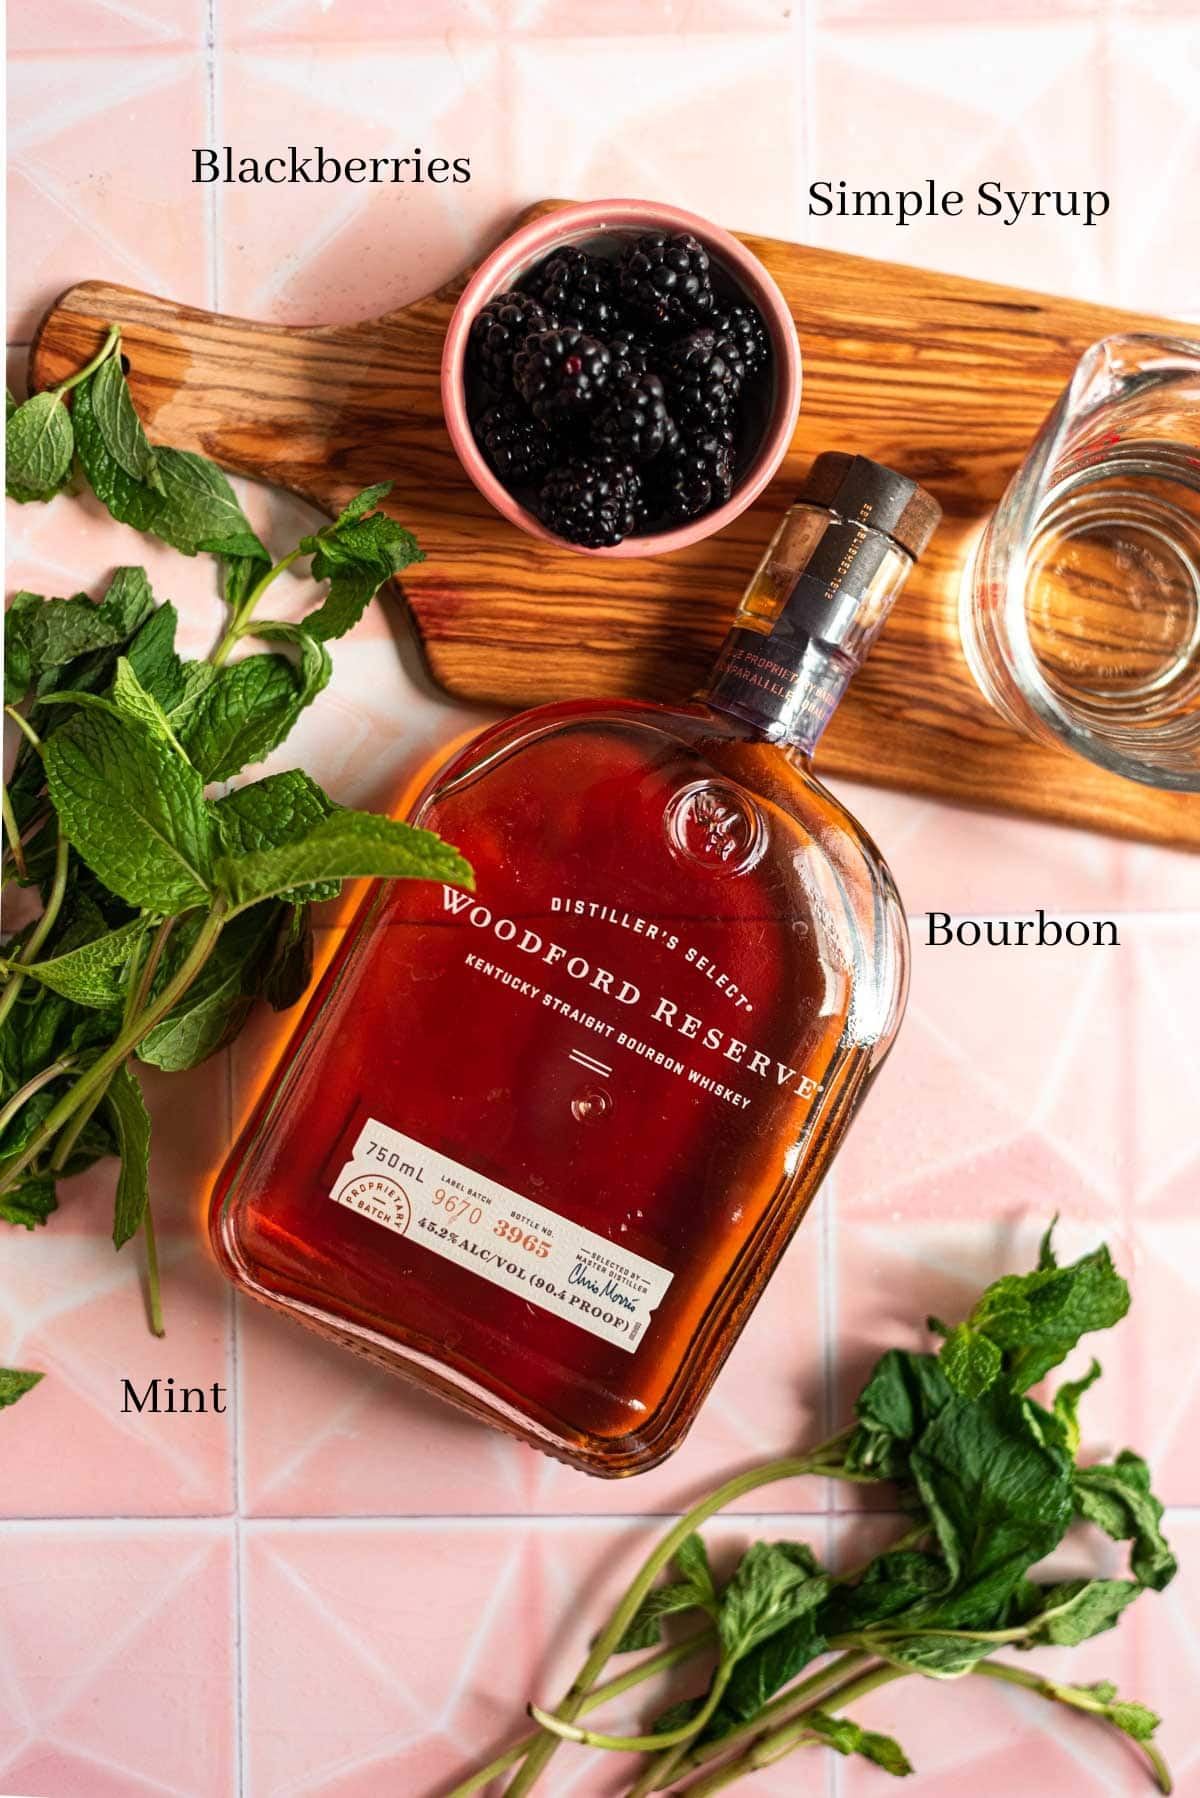 Bourbon, simple syrup, blackberries, and mint on a pink tile table.